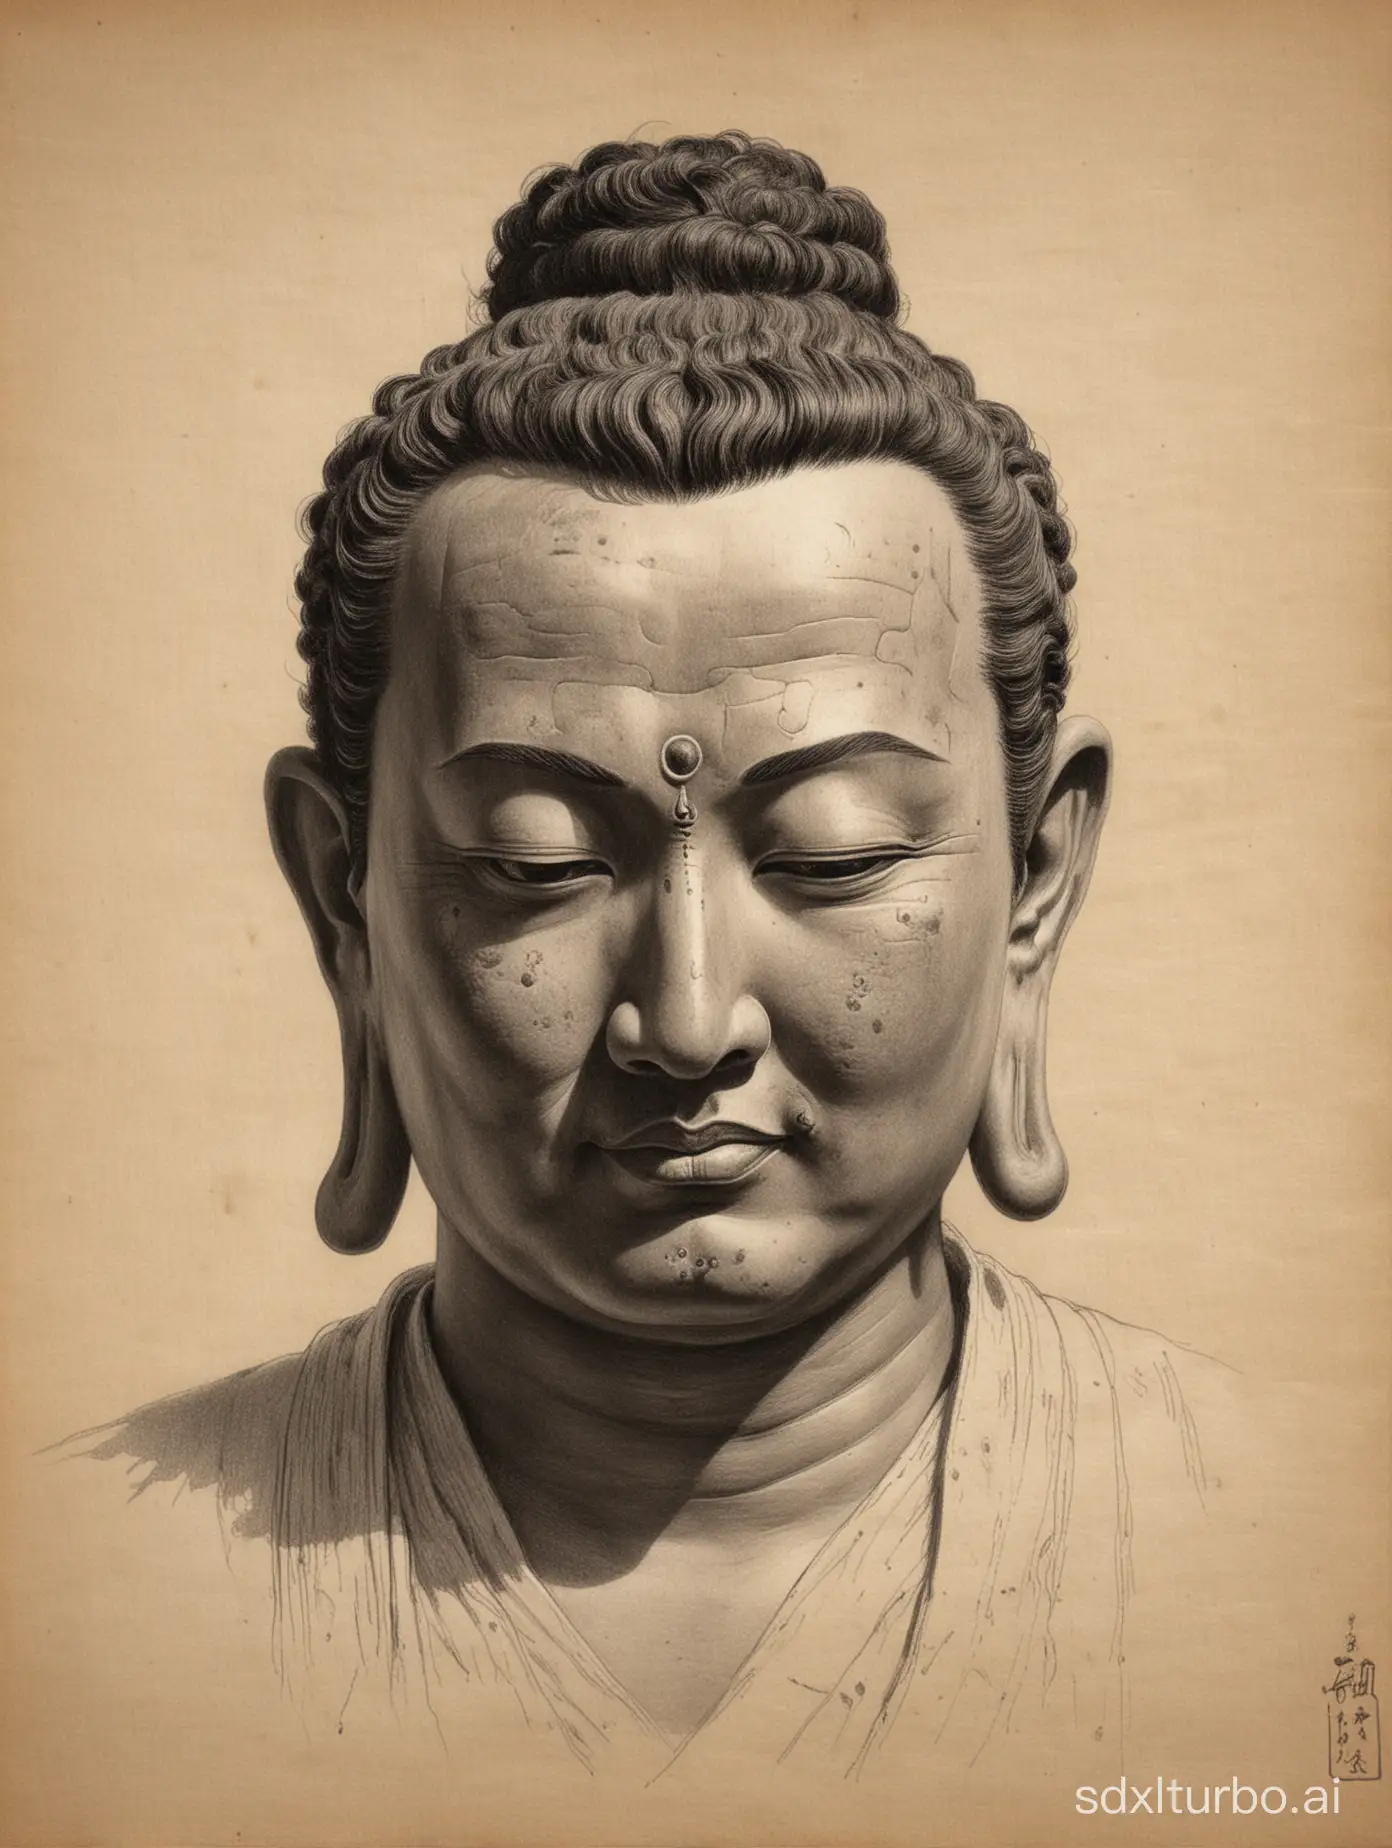 Pencil-Sketch-of-Sinister-Ancient-Chinese-Buddha-with-Martial-Arts-Influence